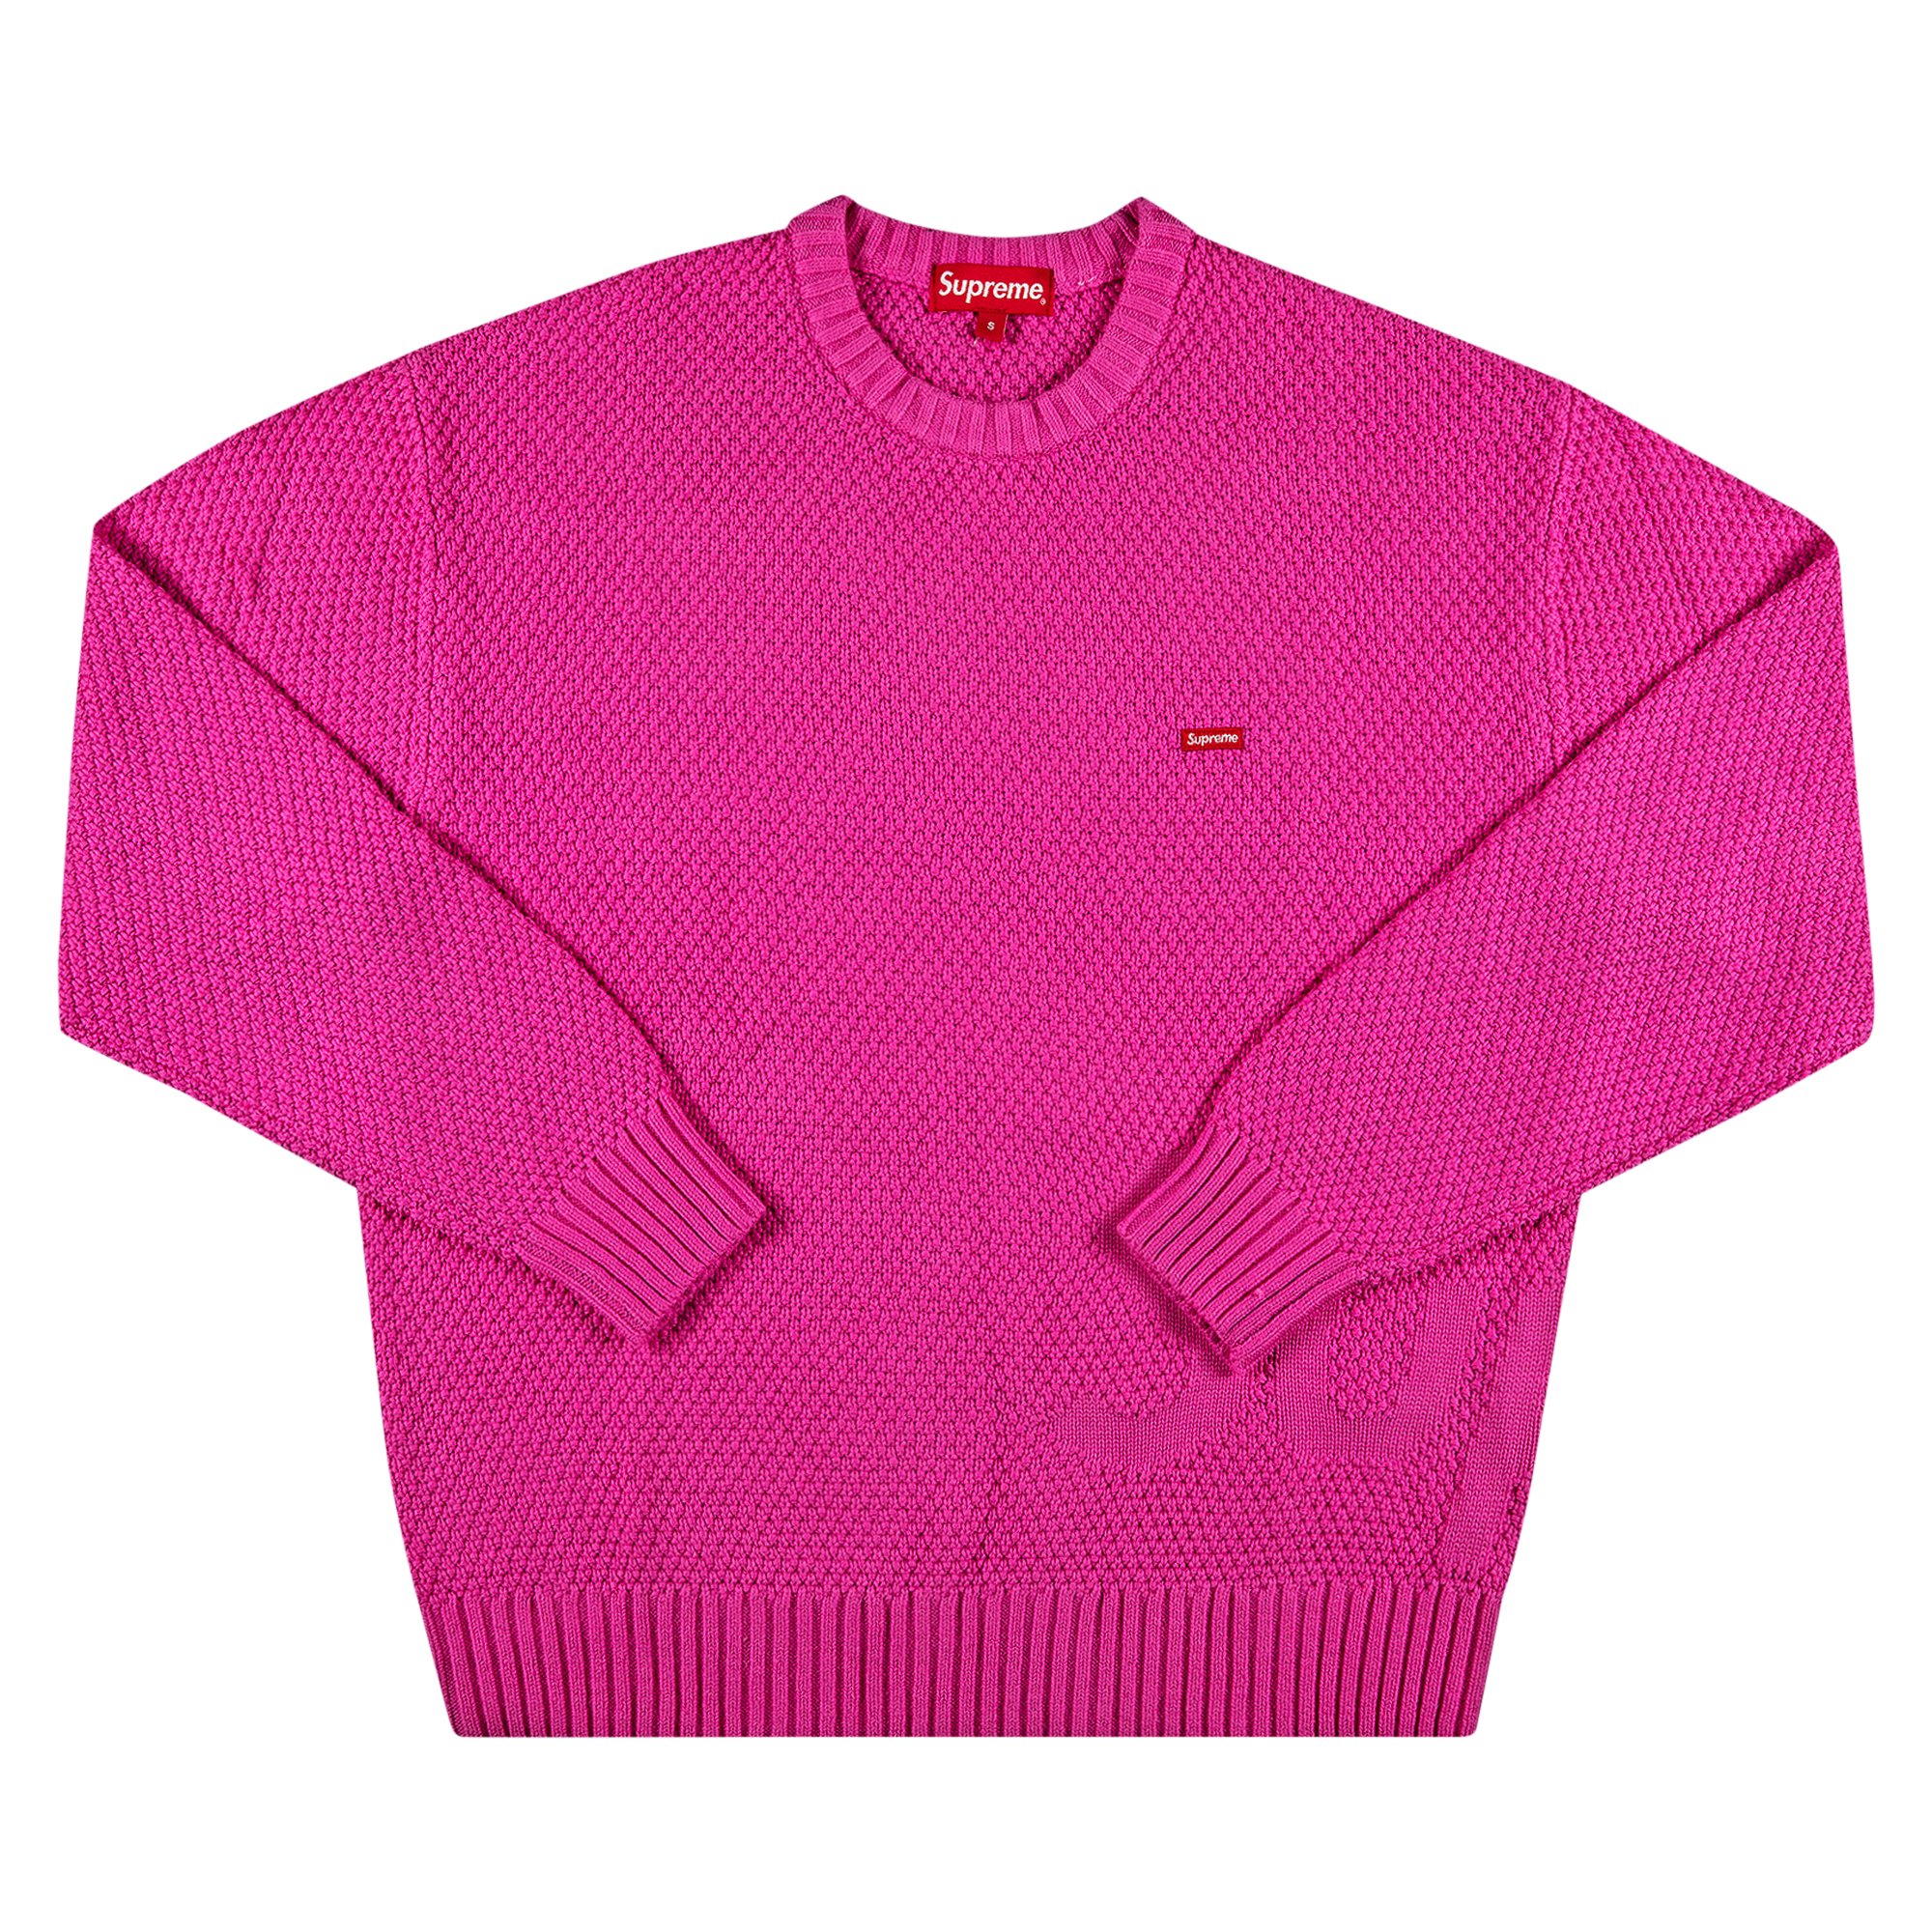 Buy Supreme Textured Small Box Sweater 'Pink' - FW20SK17 PINK